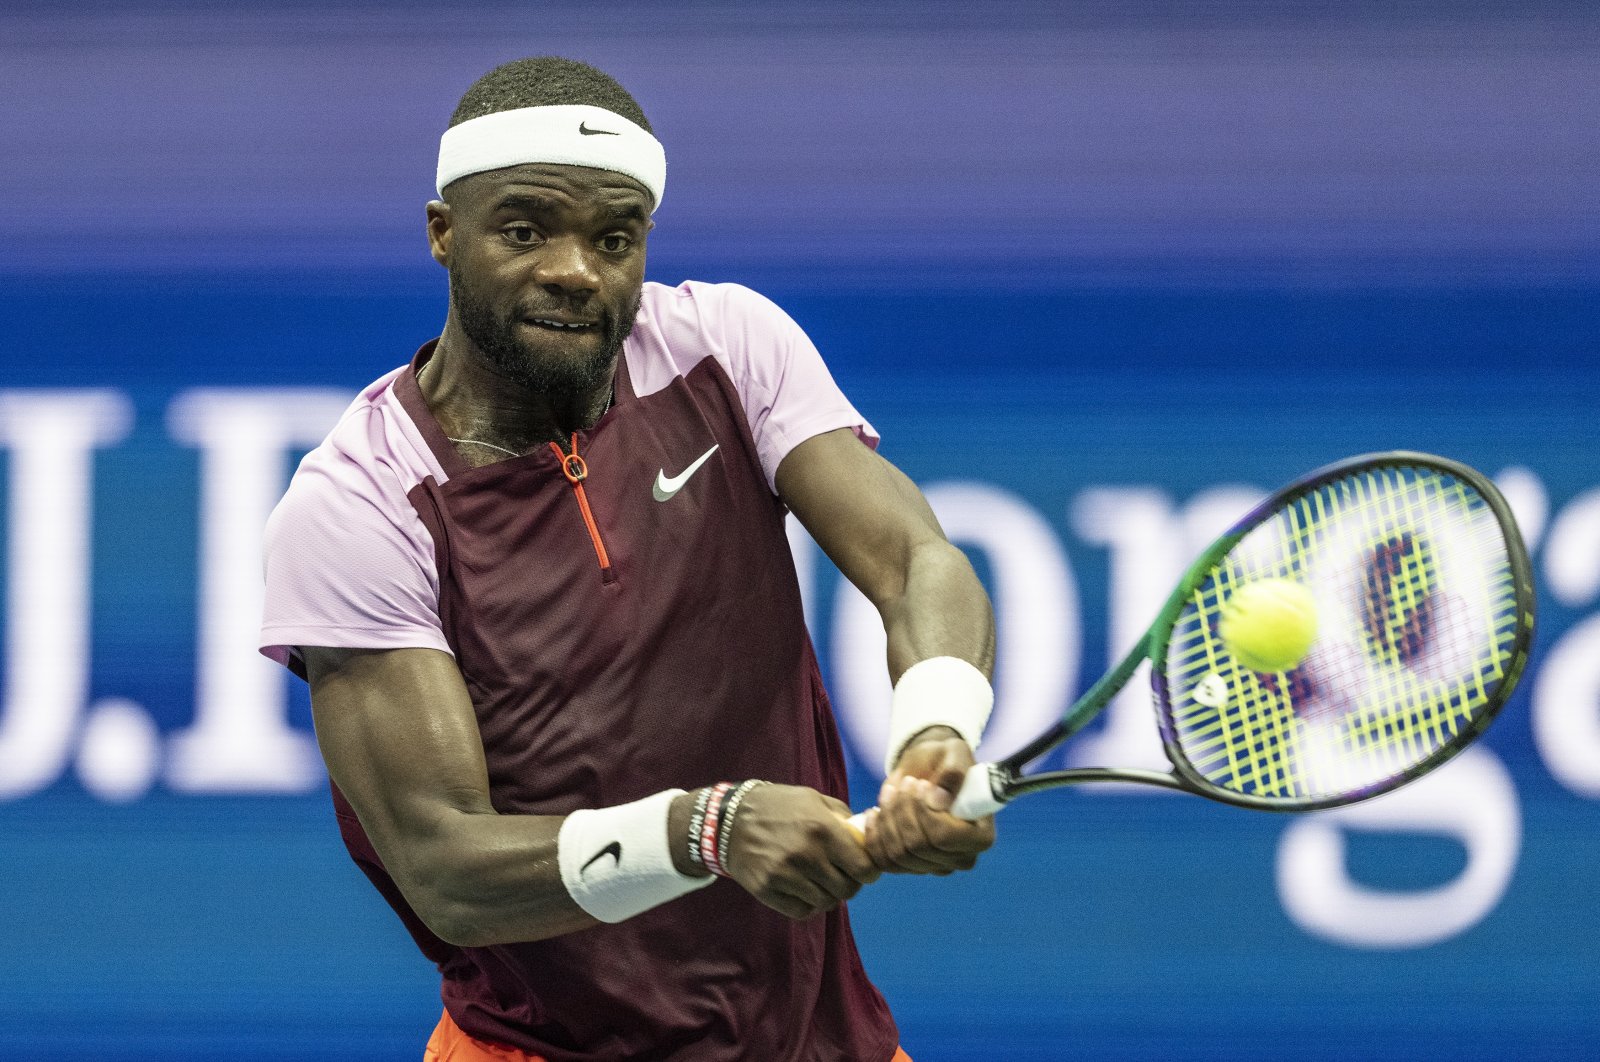 Frances Tiafoe in action against Rafa Nadal at the U.S. Open, New York, Sept. 5, 2022. (AA Photo)